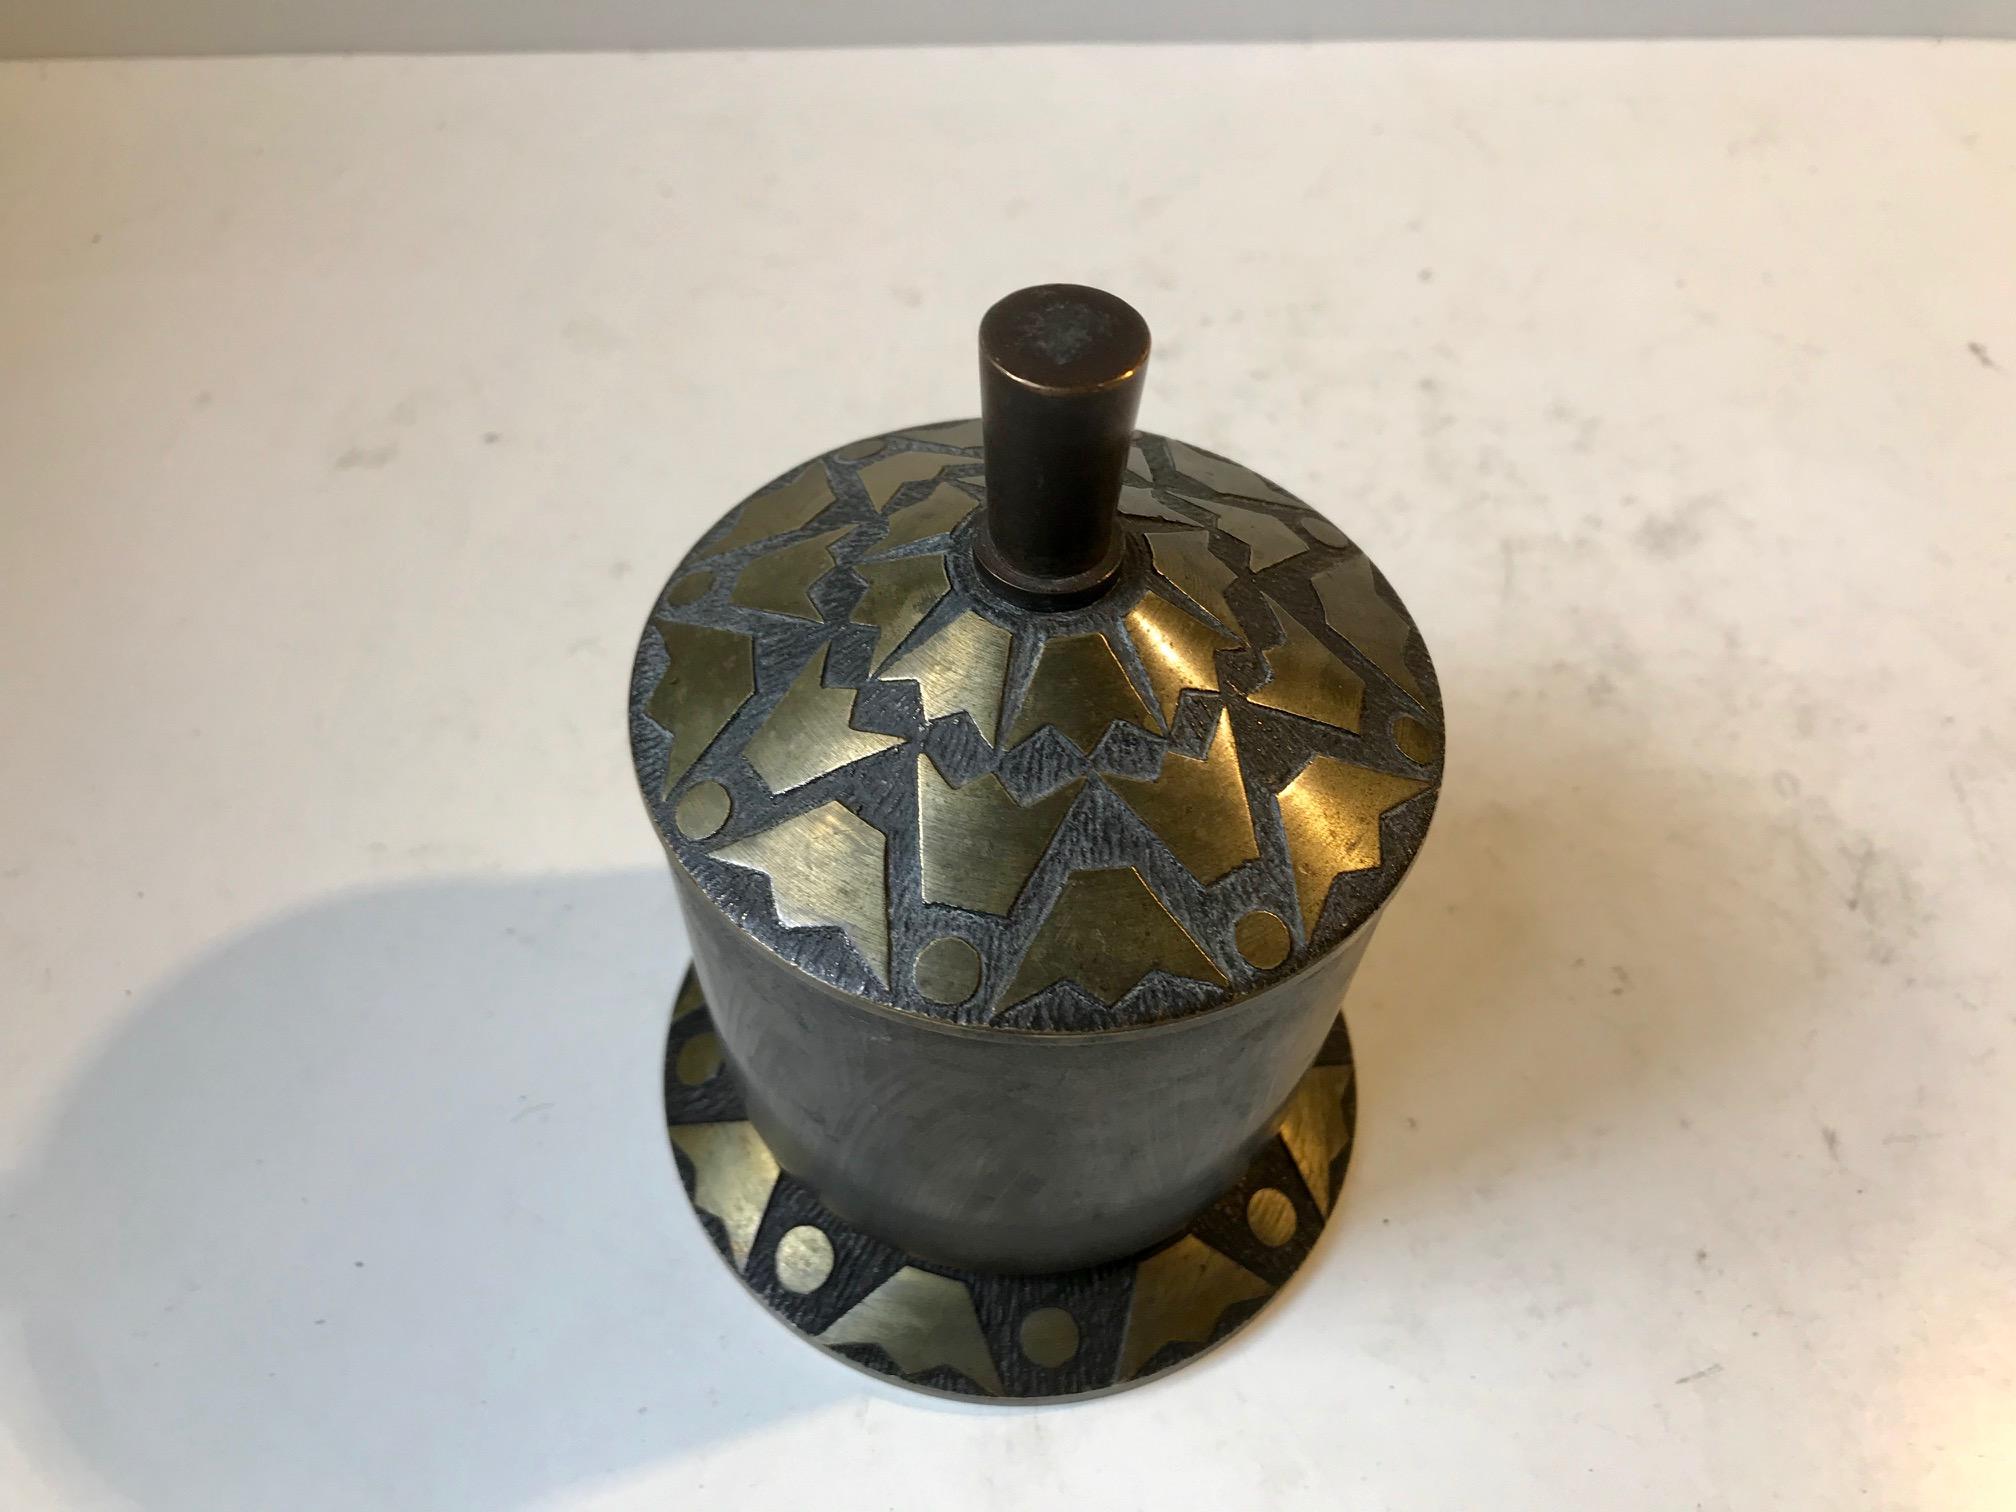 Lidded bronze jar, trinket or cigarette container decorated with crown motif's. Manufactured and designed by Nordisk Malm in Denmark during the 1930s in a style reminiscent of Tinos and Argentor.